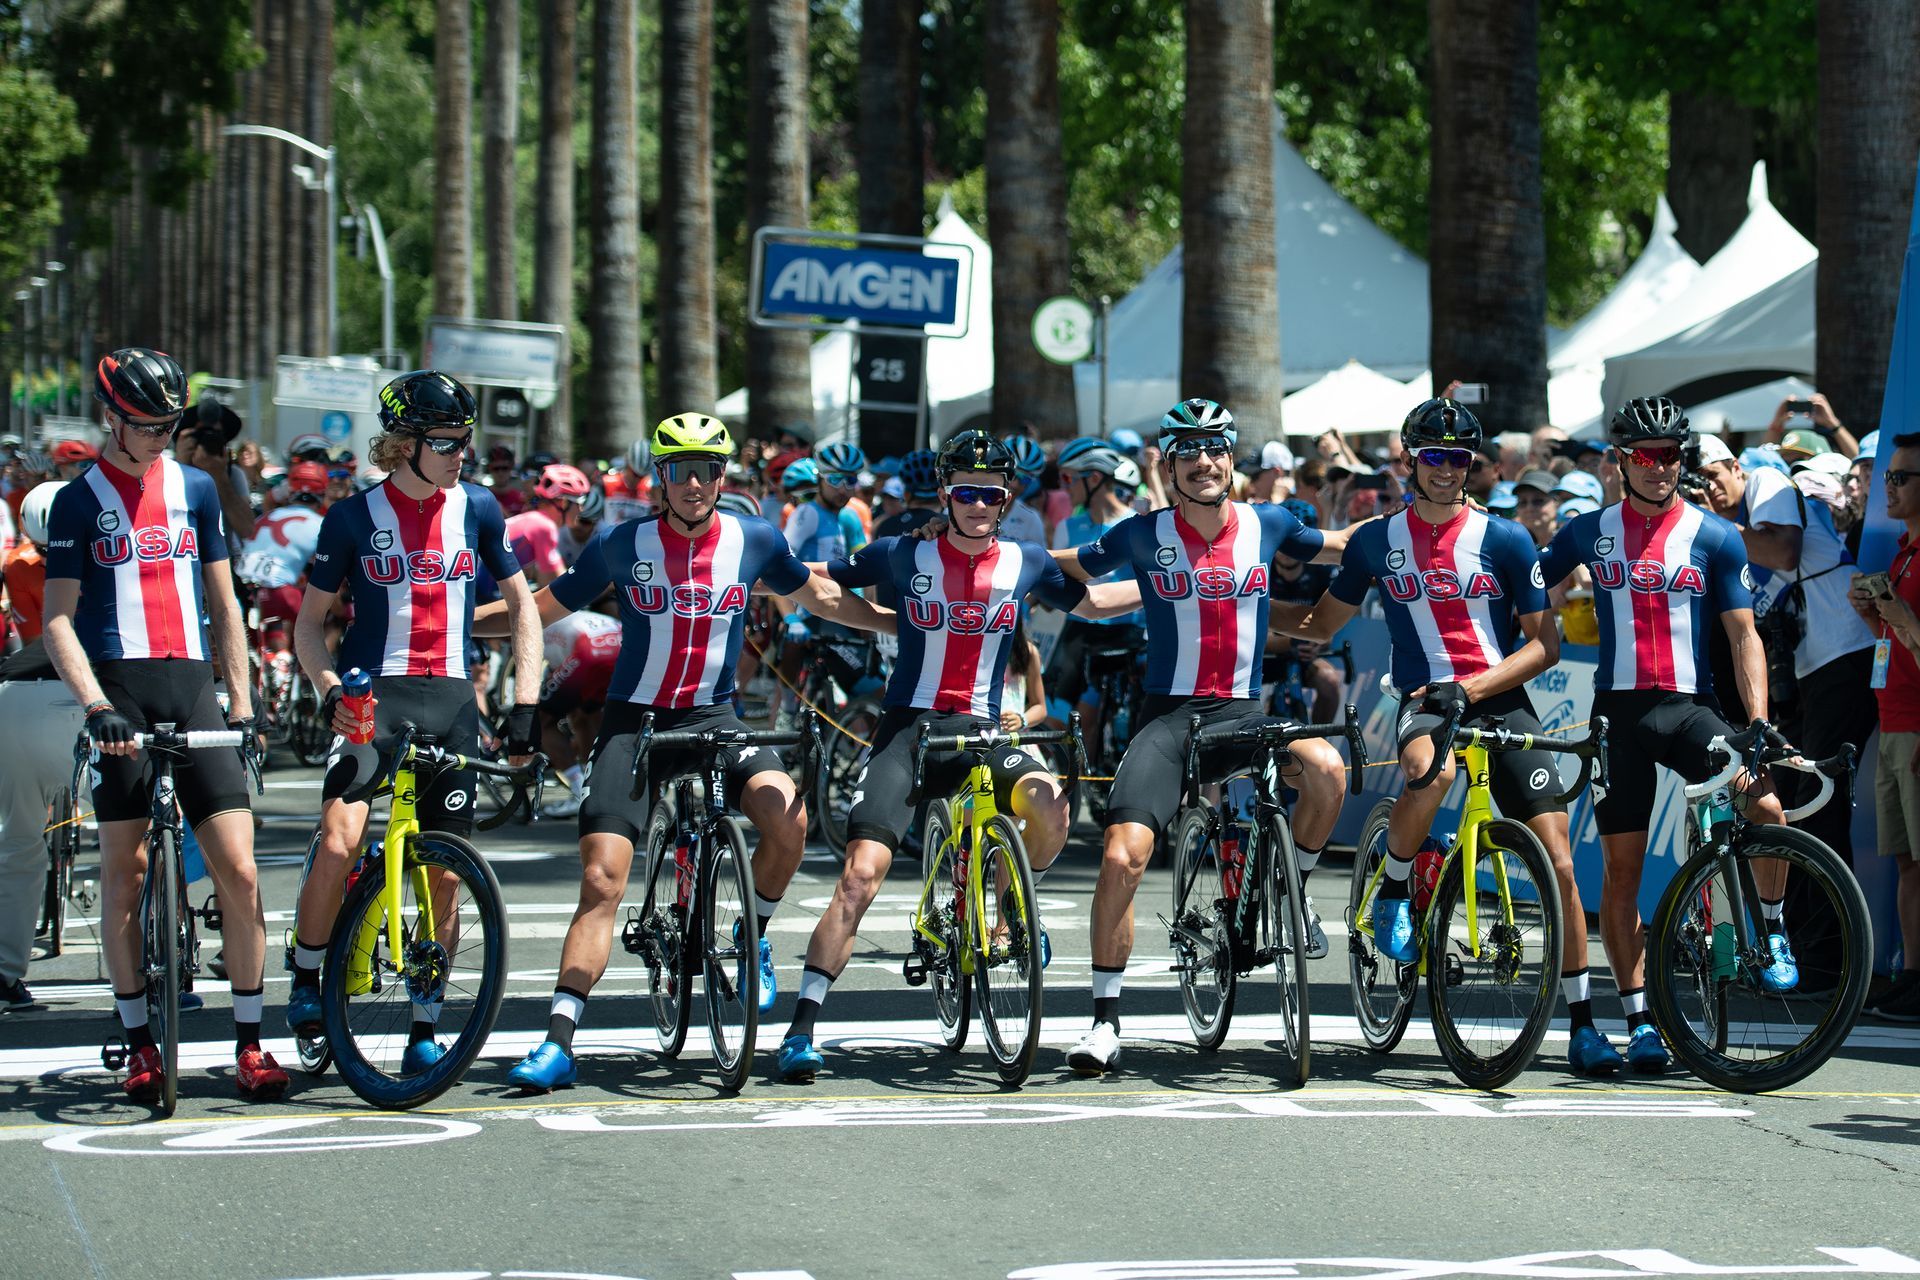 USA mens cycling team in Sacramento at the Tour of CA